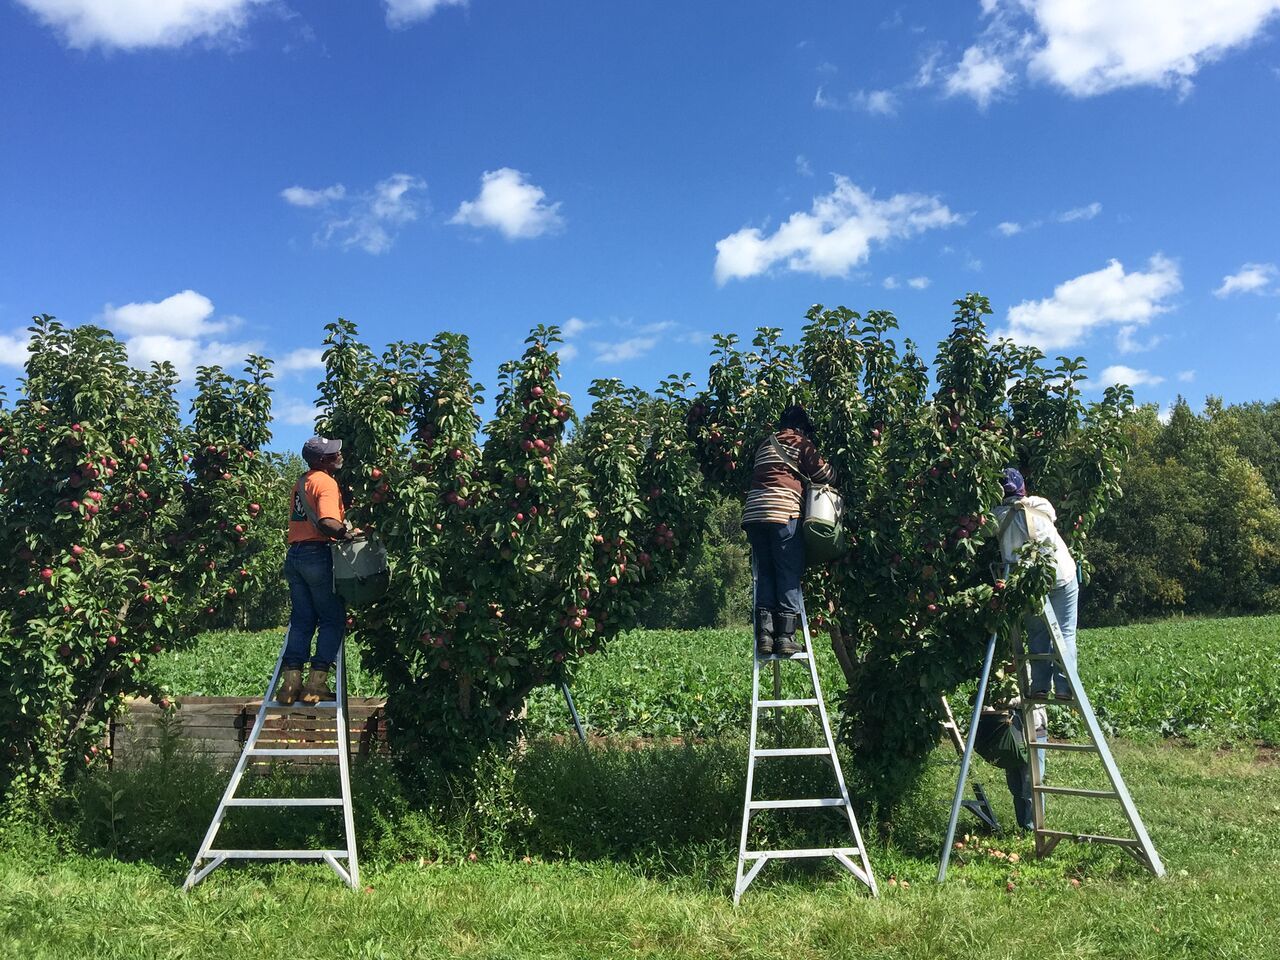 Three farmworkers pick apples standing on ladders. March 2021